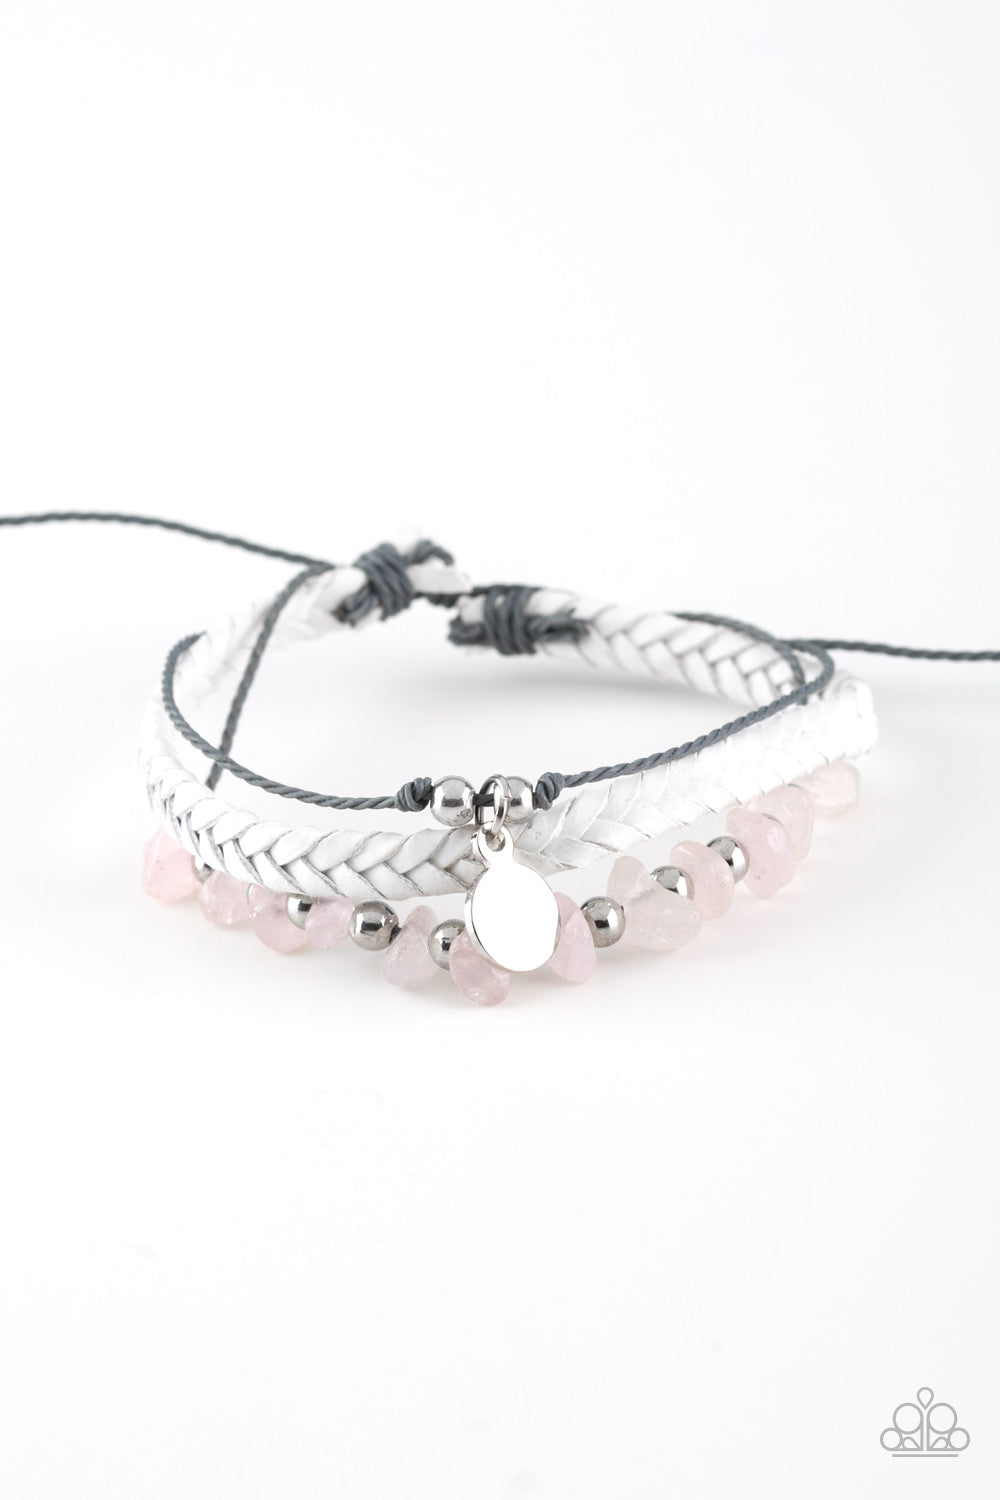 A PEACE OF WORK - PINK ROSE QUARTZ SILVER CHARM WHITE BRAIDED DRAW STRING BRACELET